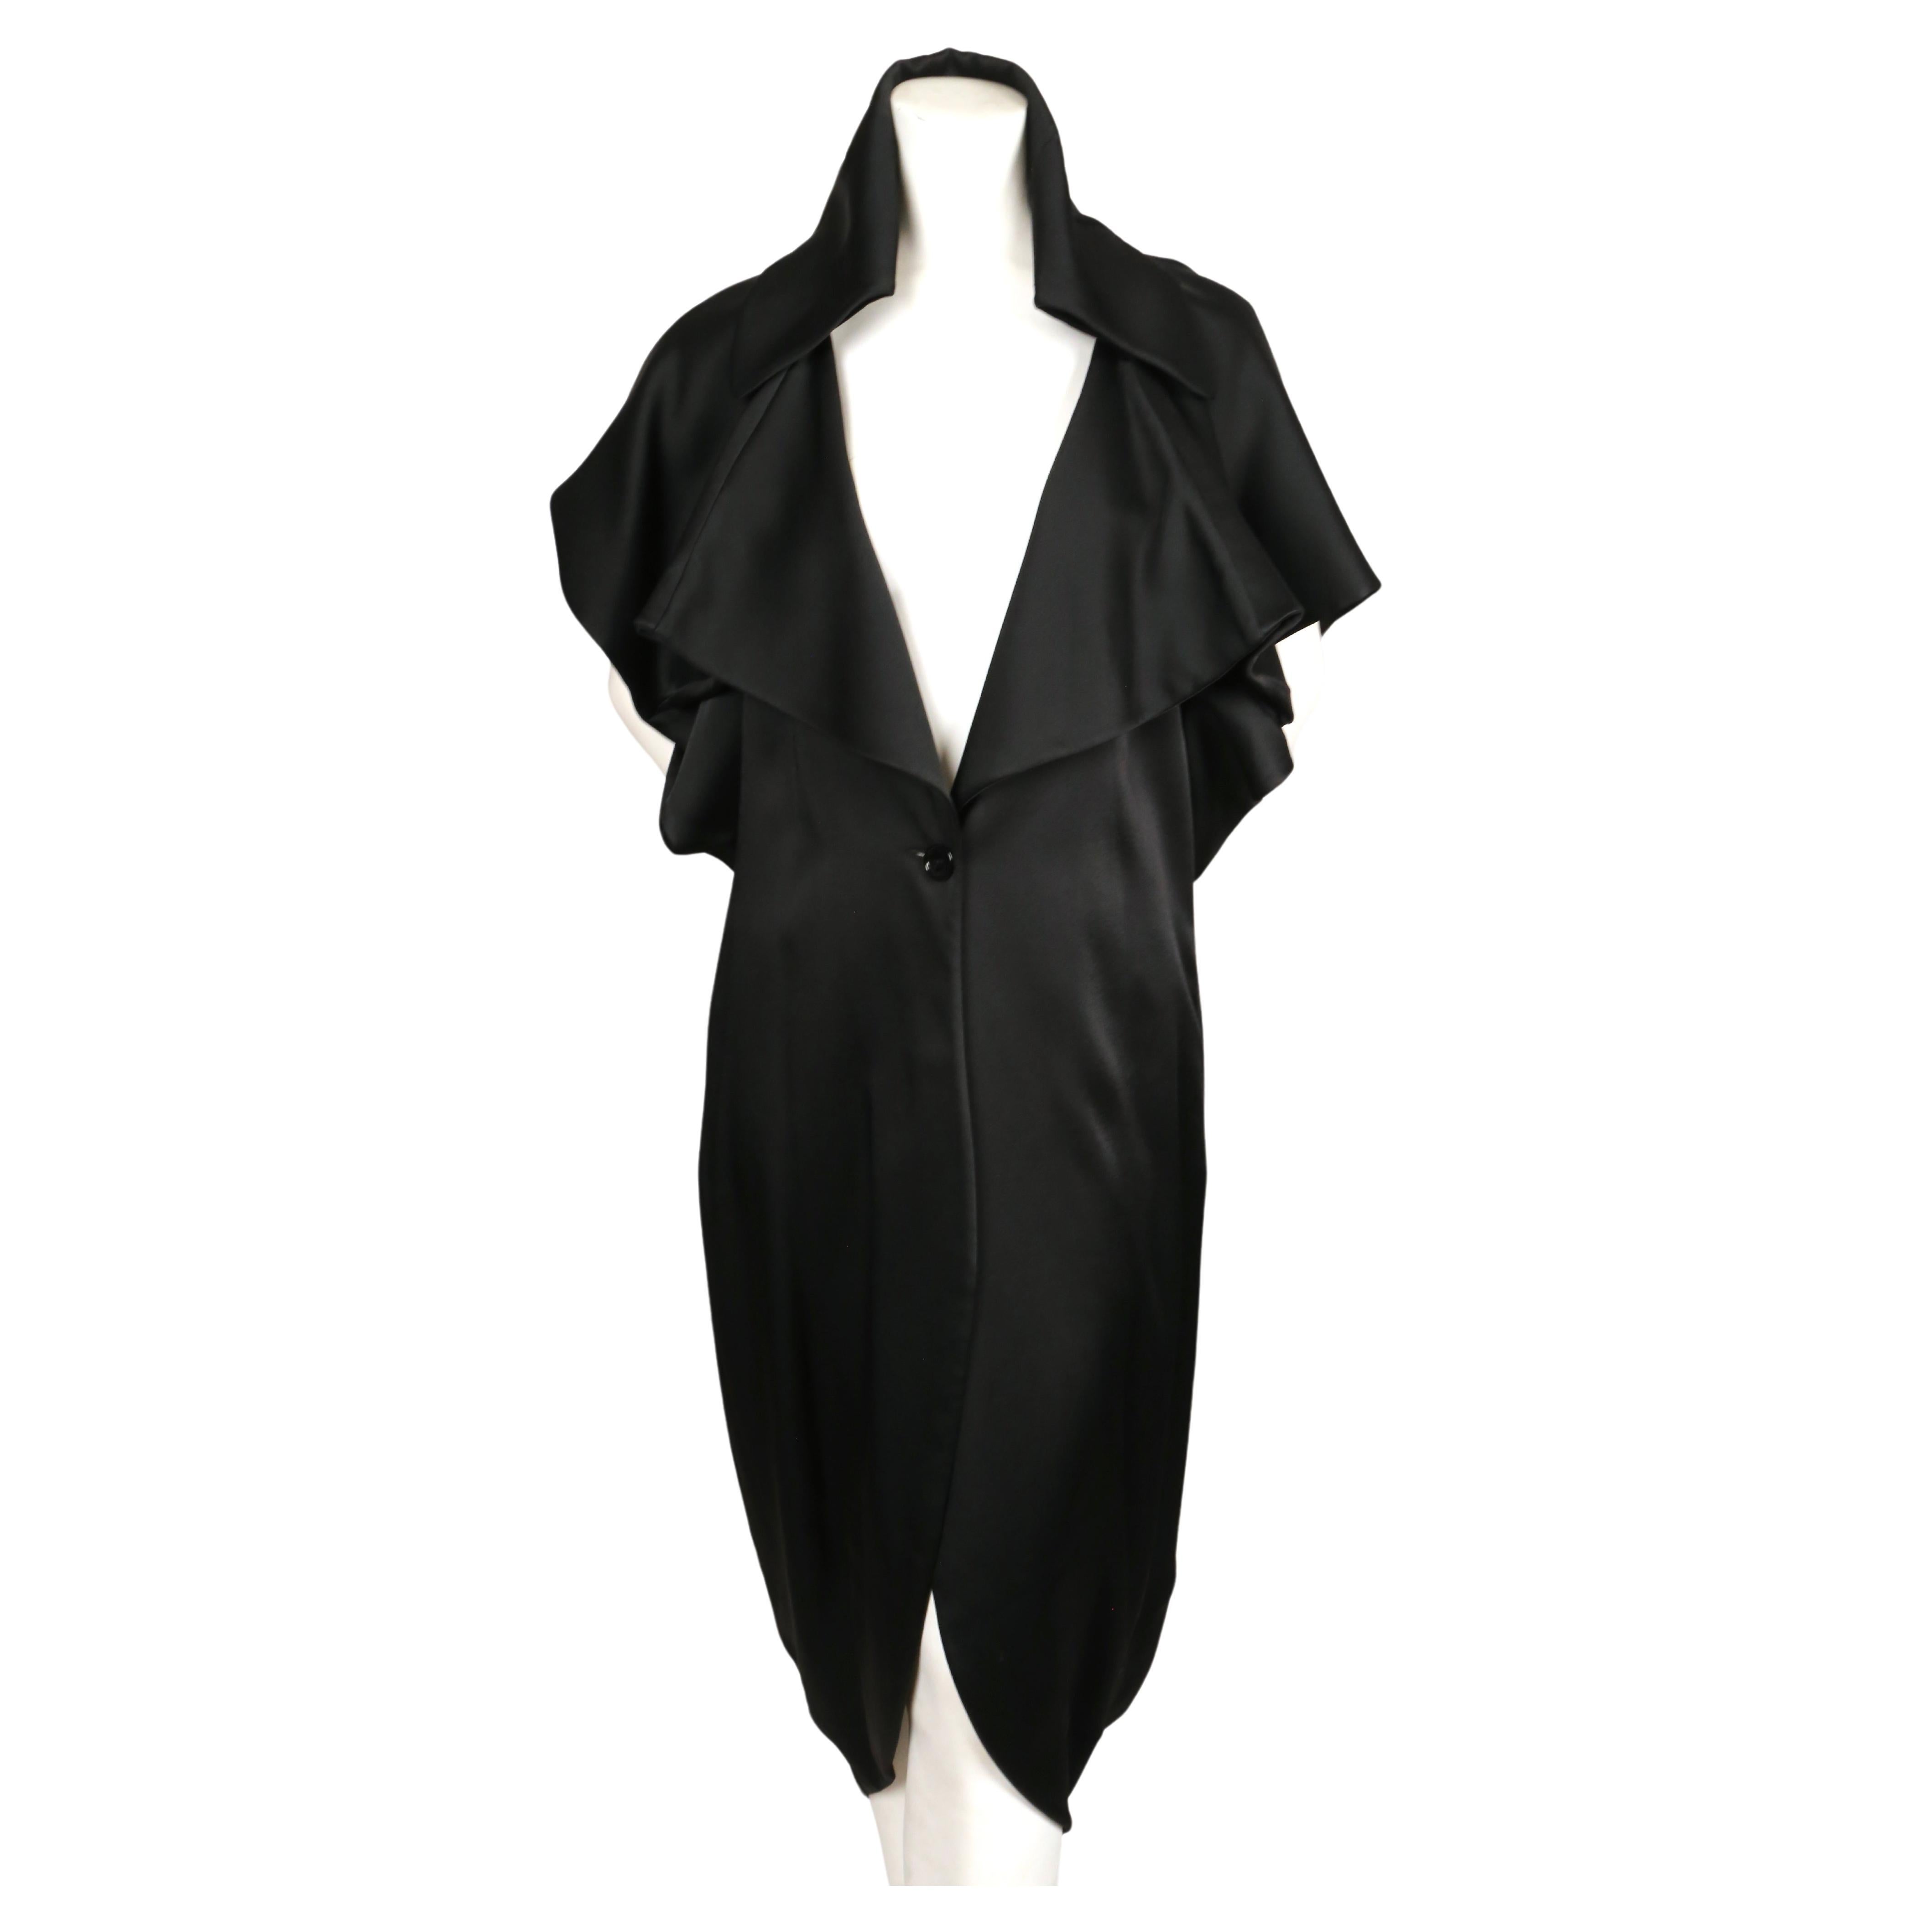 Jet-black, draped evening dress coat designed by John Galliano dating to the early 2000's. Labeled a size 42. Fits many sizes due to the oversized and draped fit. Approximate measurements: bust fully extended 56